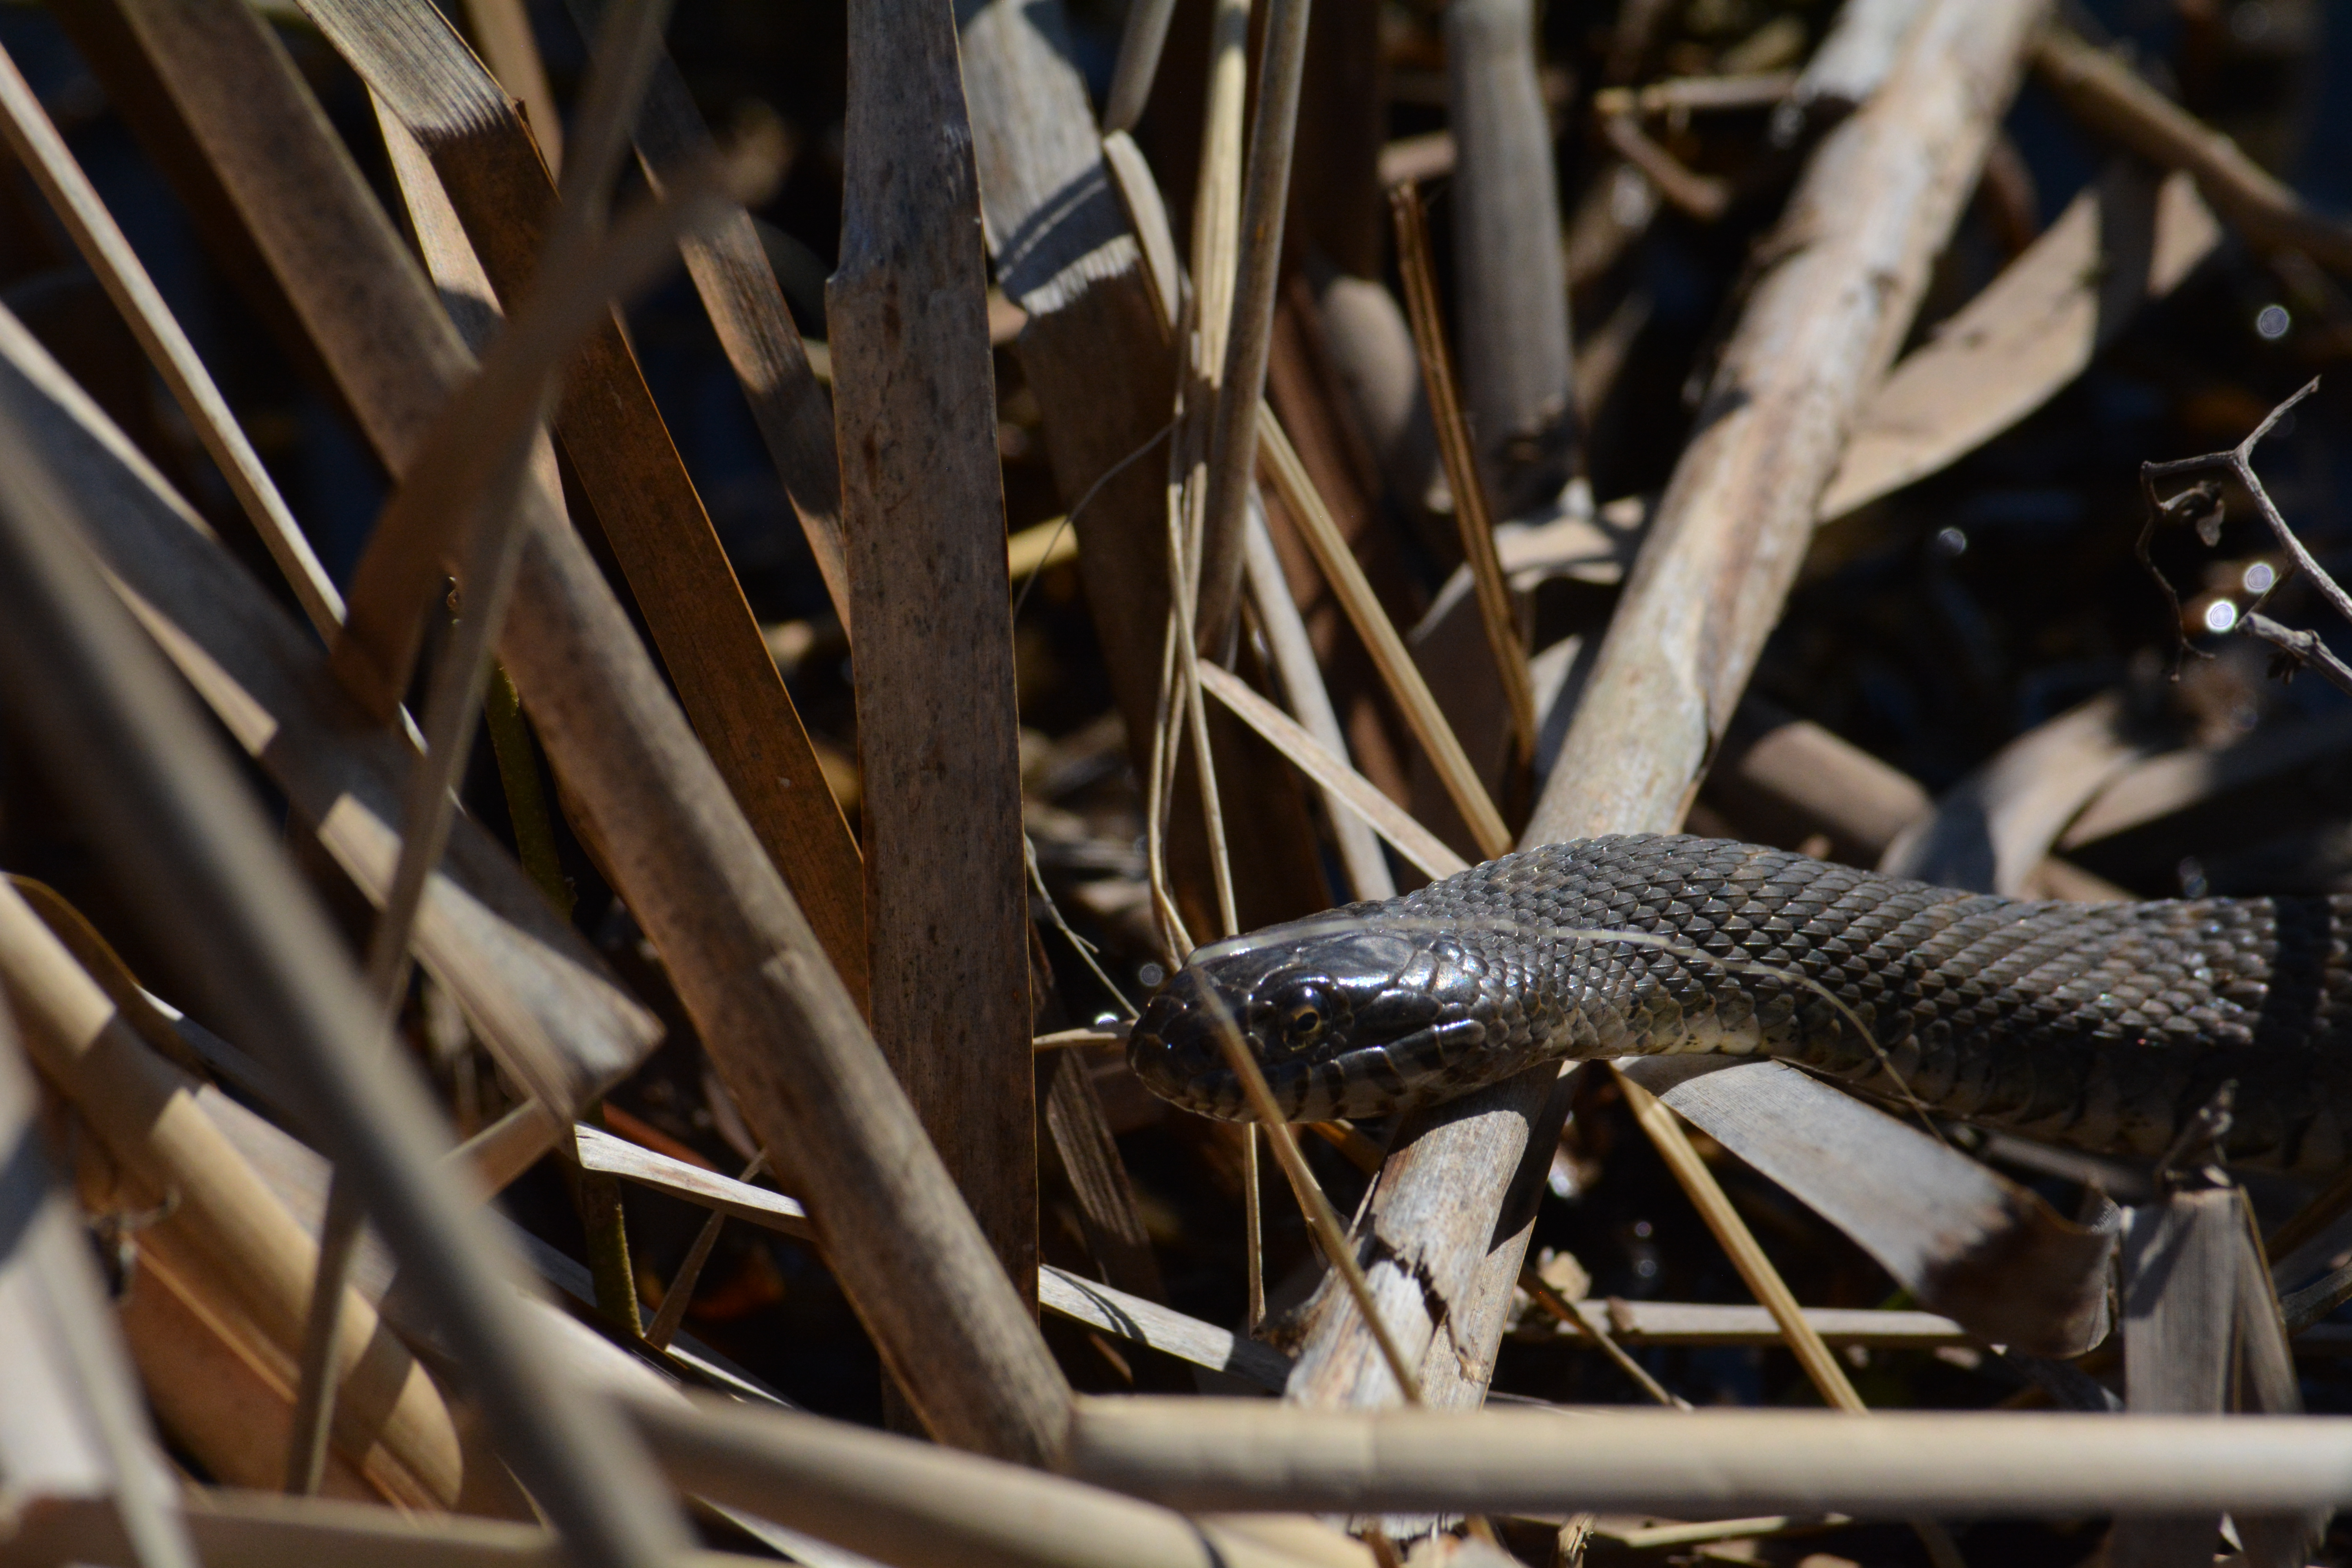 A northern water snake by Lake Ontario